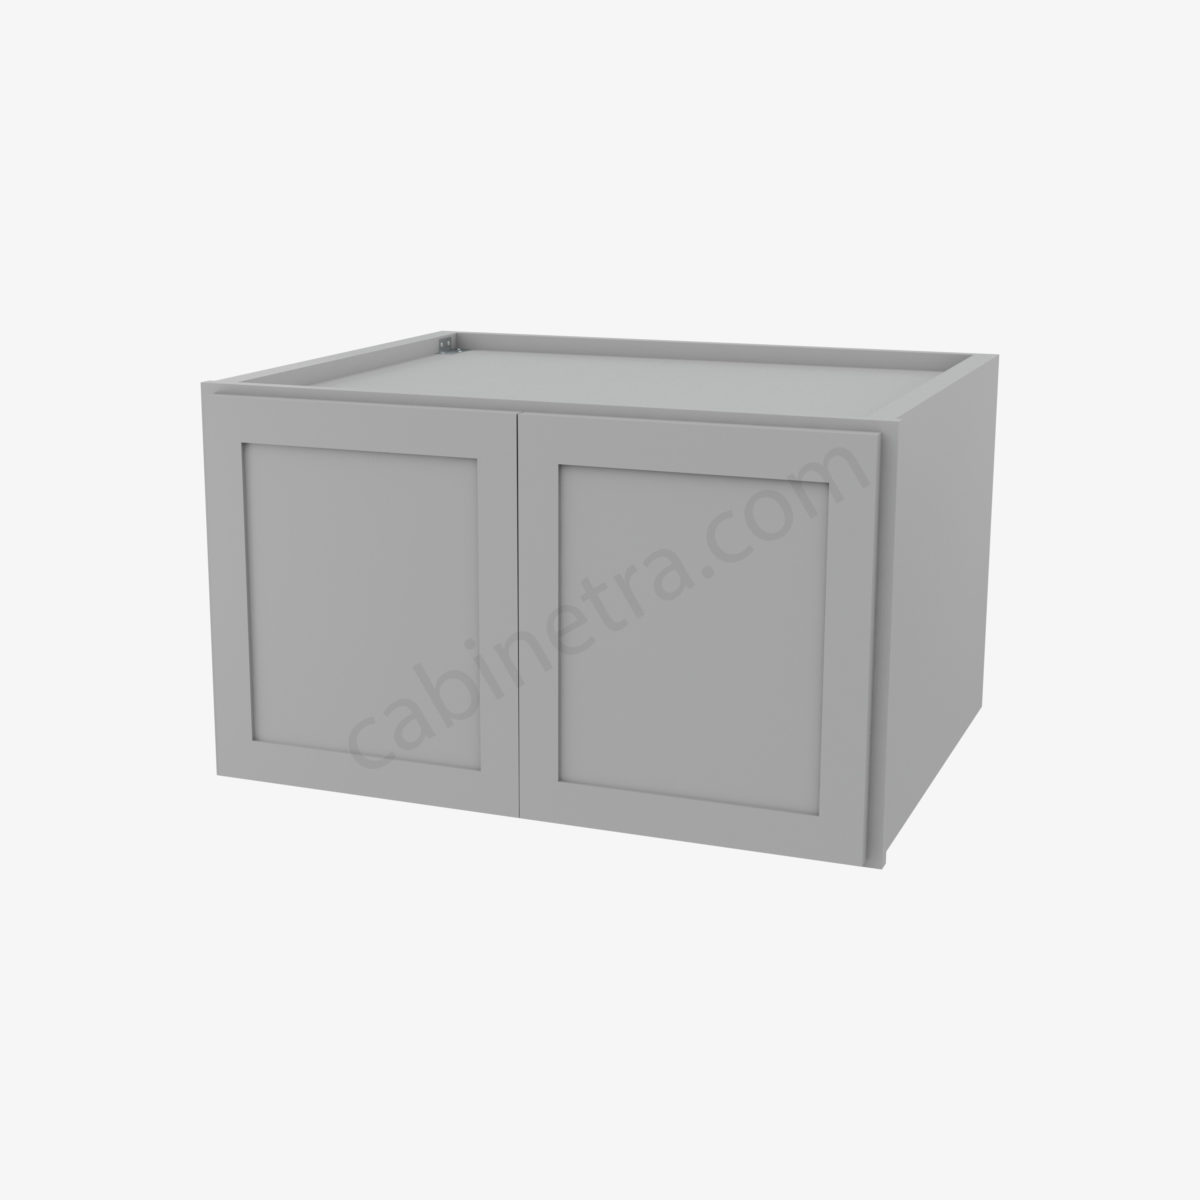 AB W301824B 0 Forevermark Lait Gray Shaker Cabinetra scaled